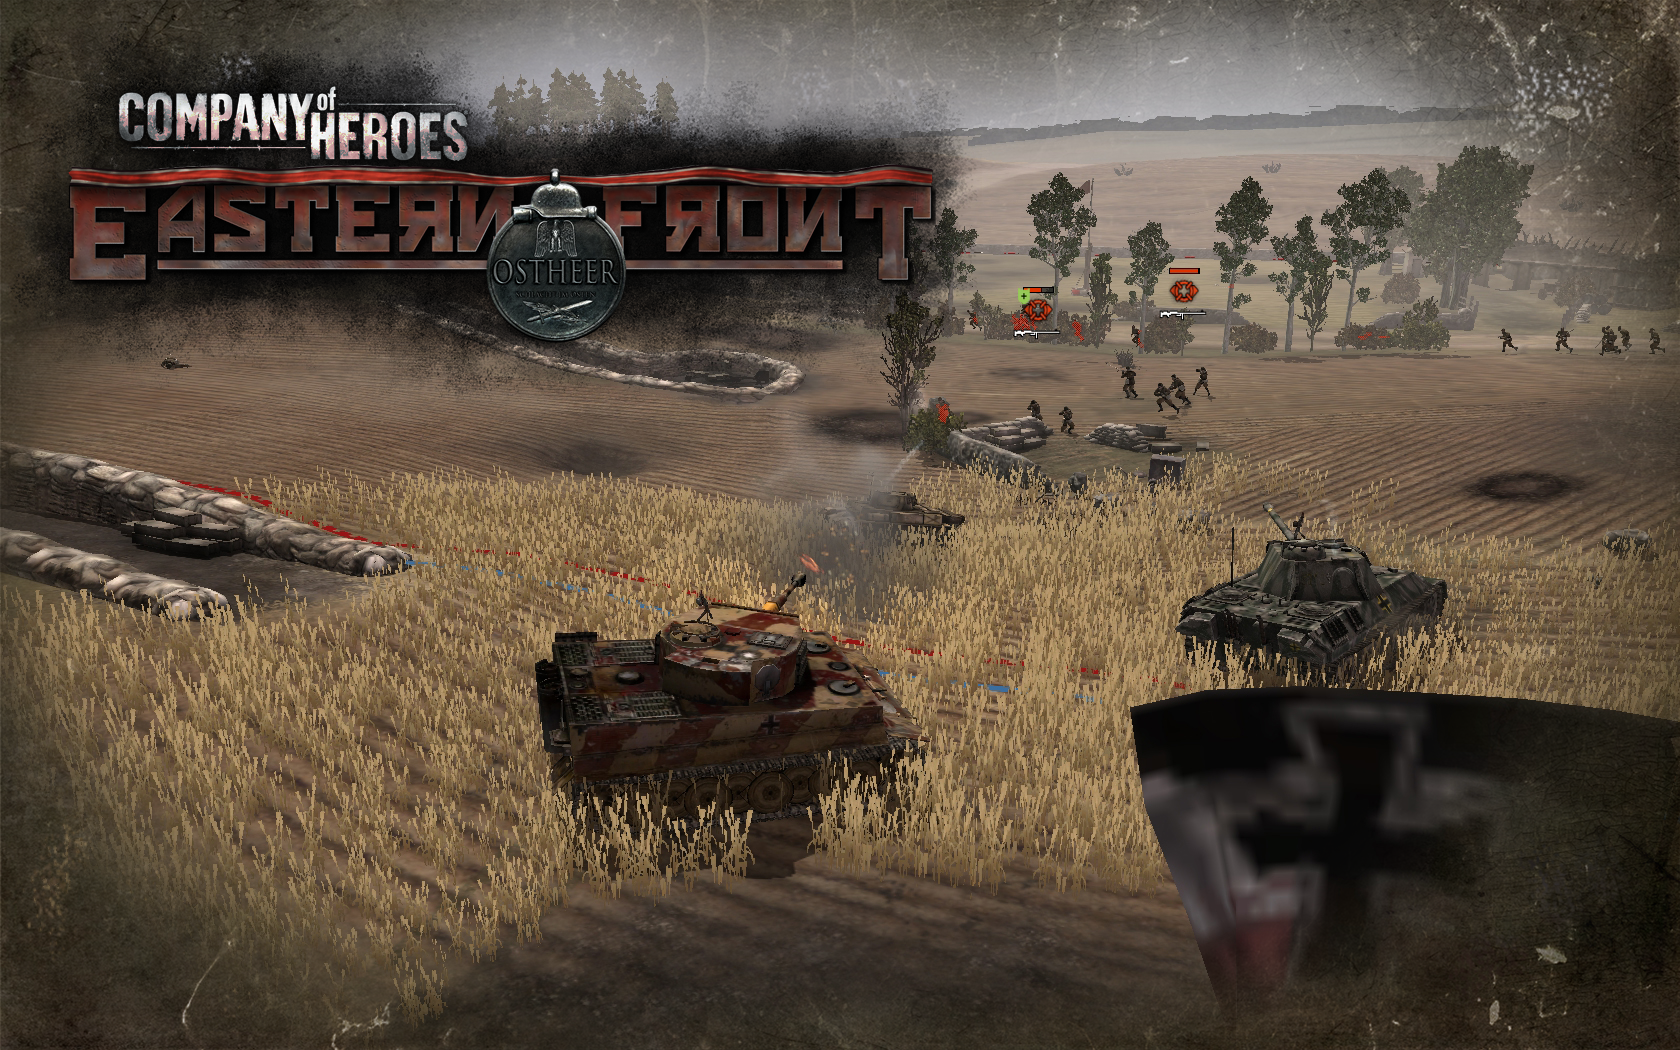 Ingame Screens image - Company of Heroes: Eastern Front mod for Company ...